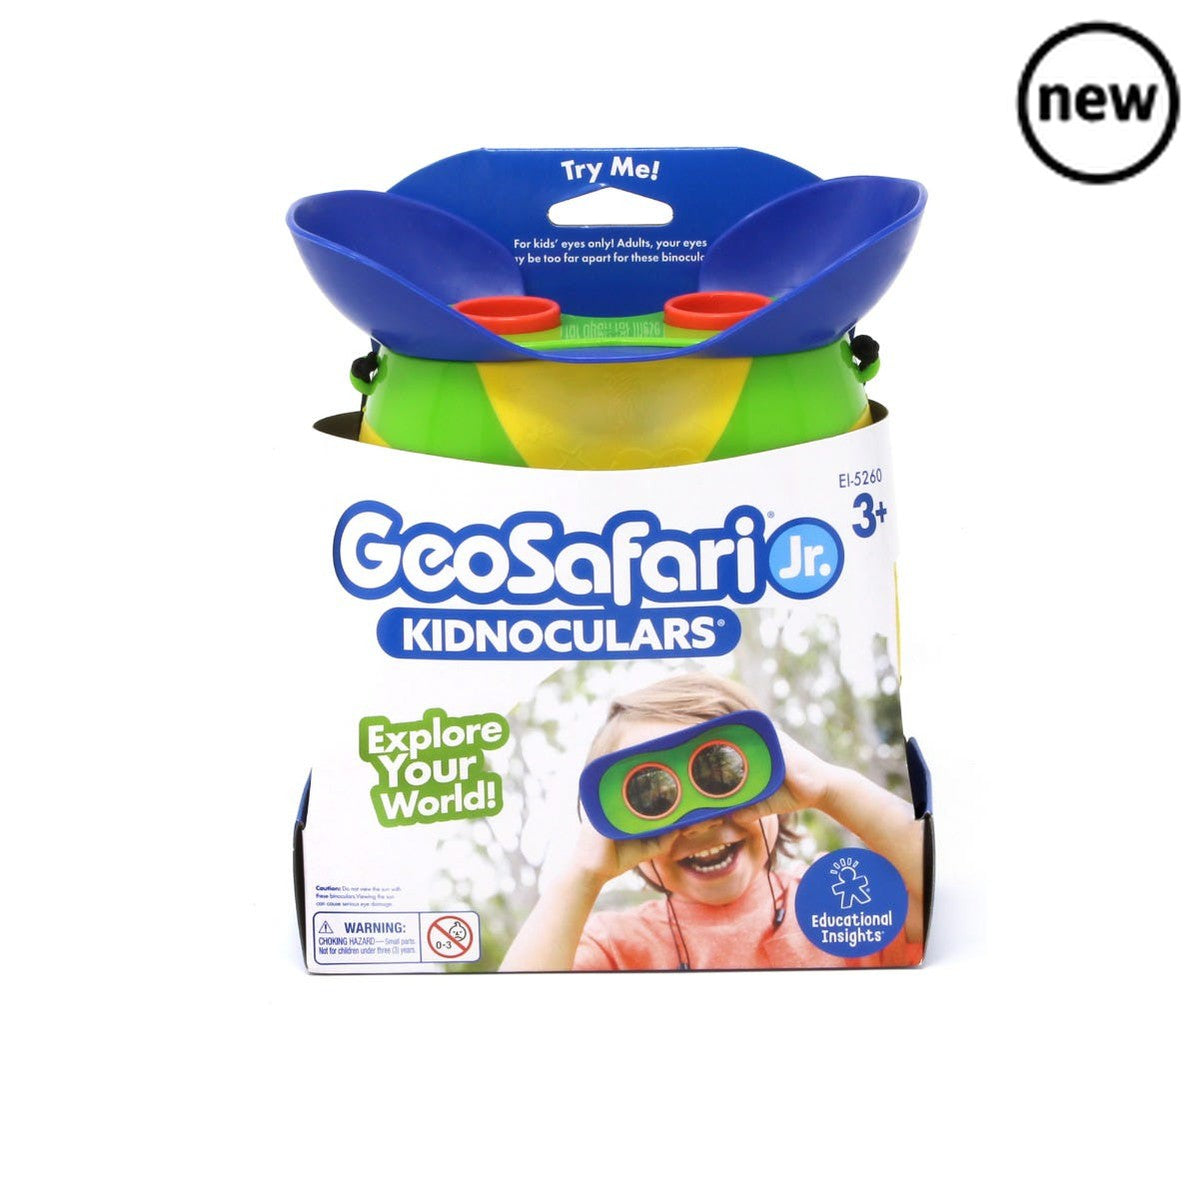 GeoSafari Jr Kidnoculars, Explore the outdoors with the only binoculars designed specifically for little kids. Enlarged, focus-free eyepieces which are more than three times the size of ordinary binoculars, and perfect-fit goggles with placement guide enable young children, even toddlers, to see up close. These colourful binoculars that have been specifically designed for children. Lightweight and durable these eye pieces are perfect for small explorers! GeoSafari Jr Kidnoculars Binoculars feature focus-fre